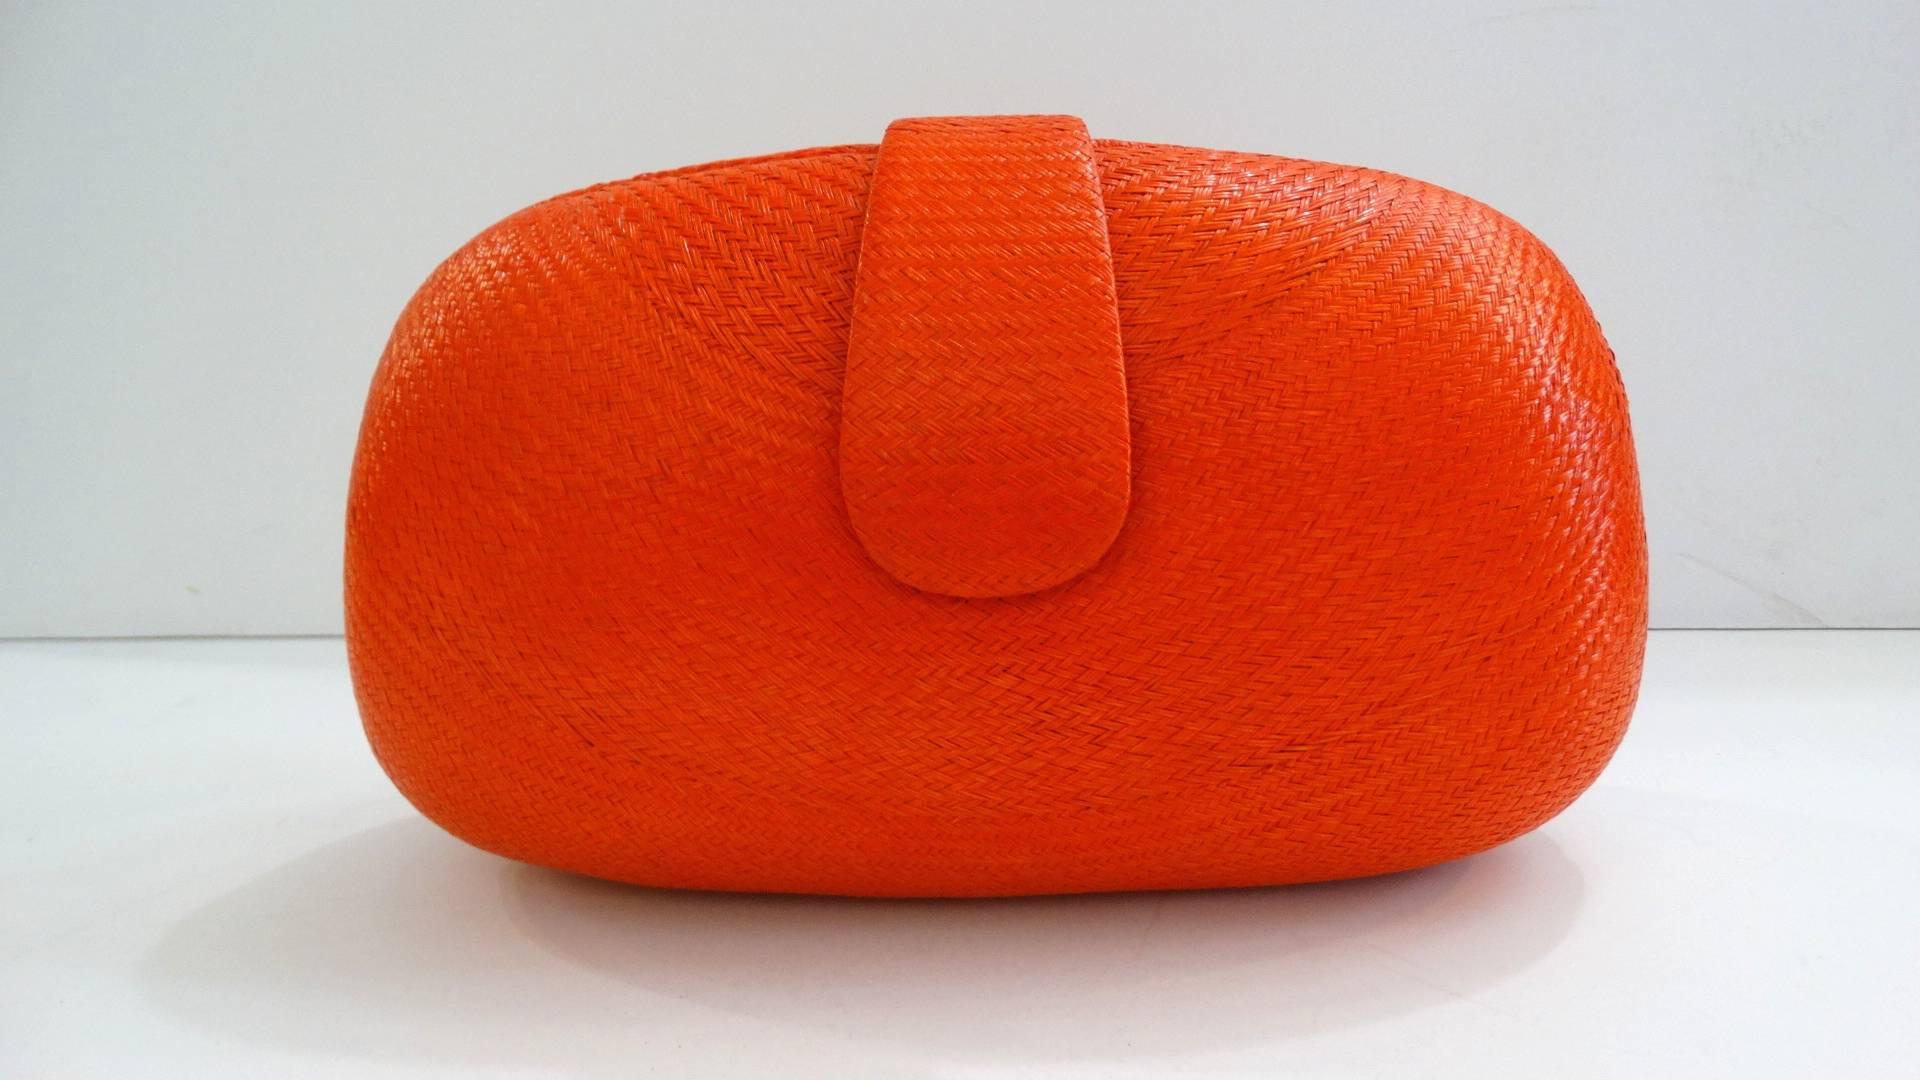 Adorable 1970s orange rattan bag! Tightly woven glossy rattan material in a summery orange color. Bag unsnaps to reveal a fully lined cloth interior. Comes with woven rope strap in a matching orange color that can be tucked in for wear as a clutch.